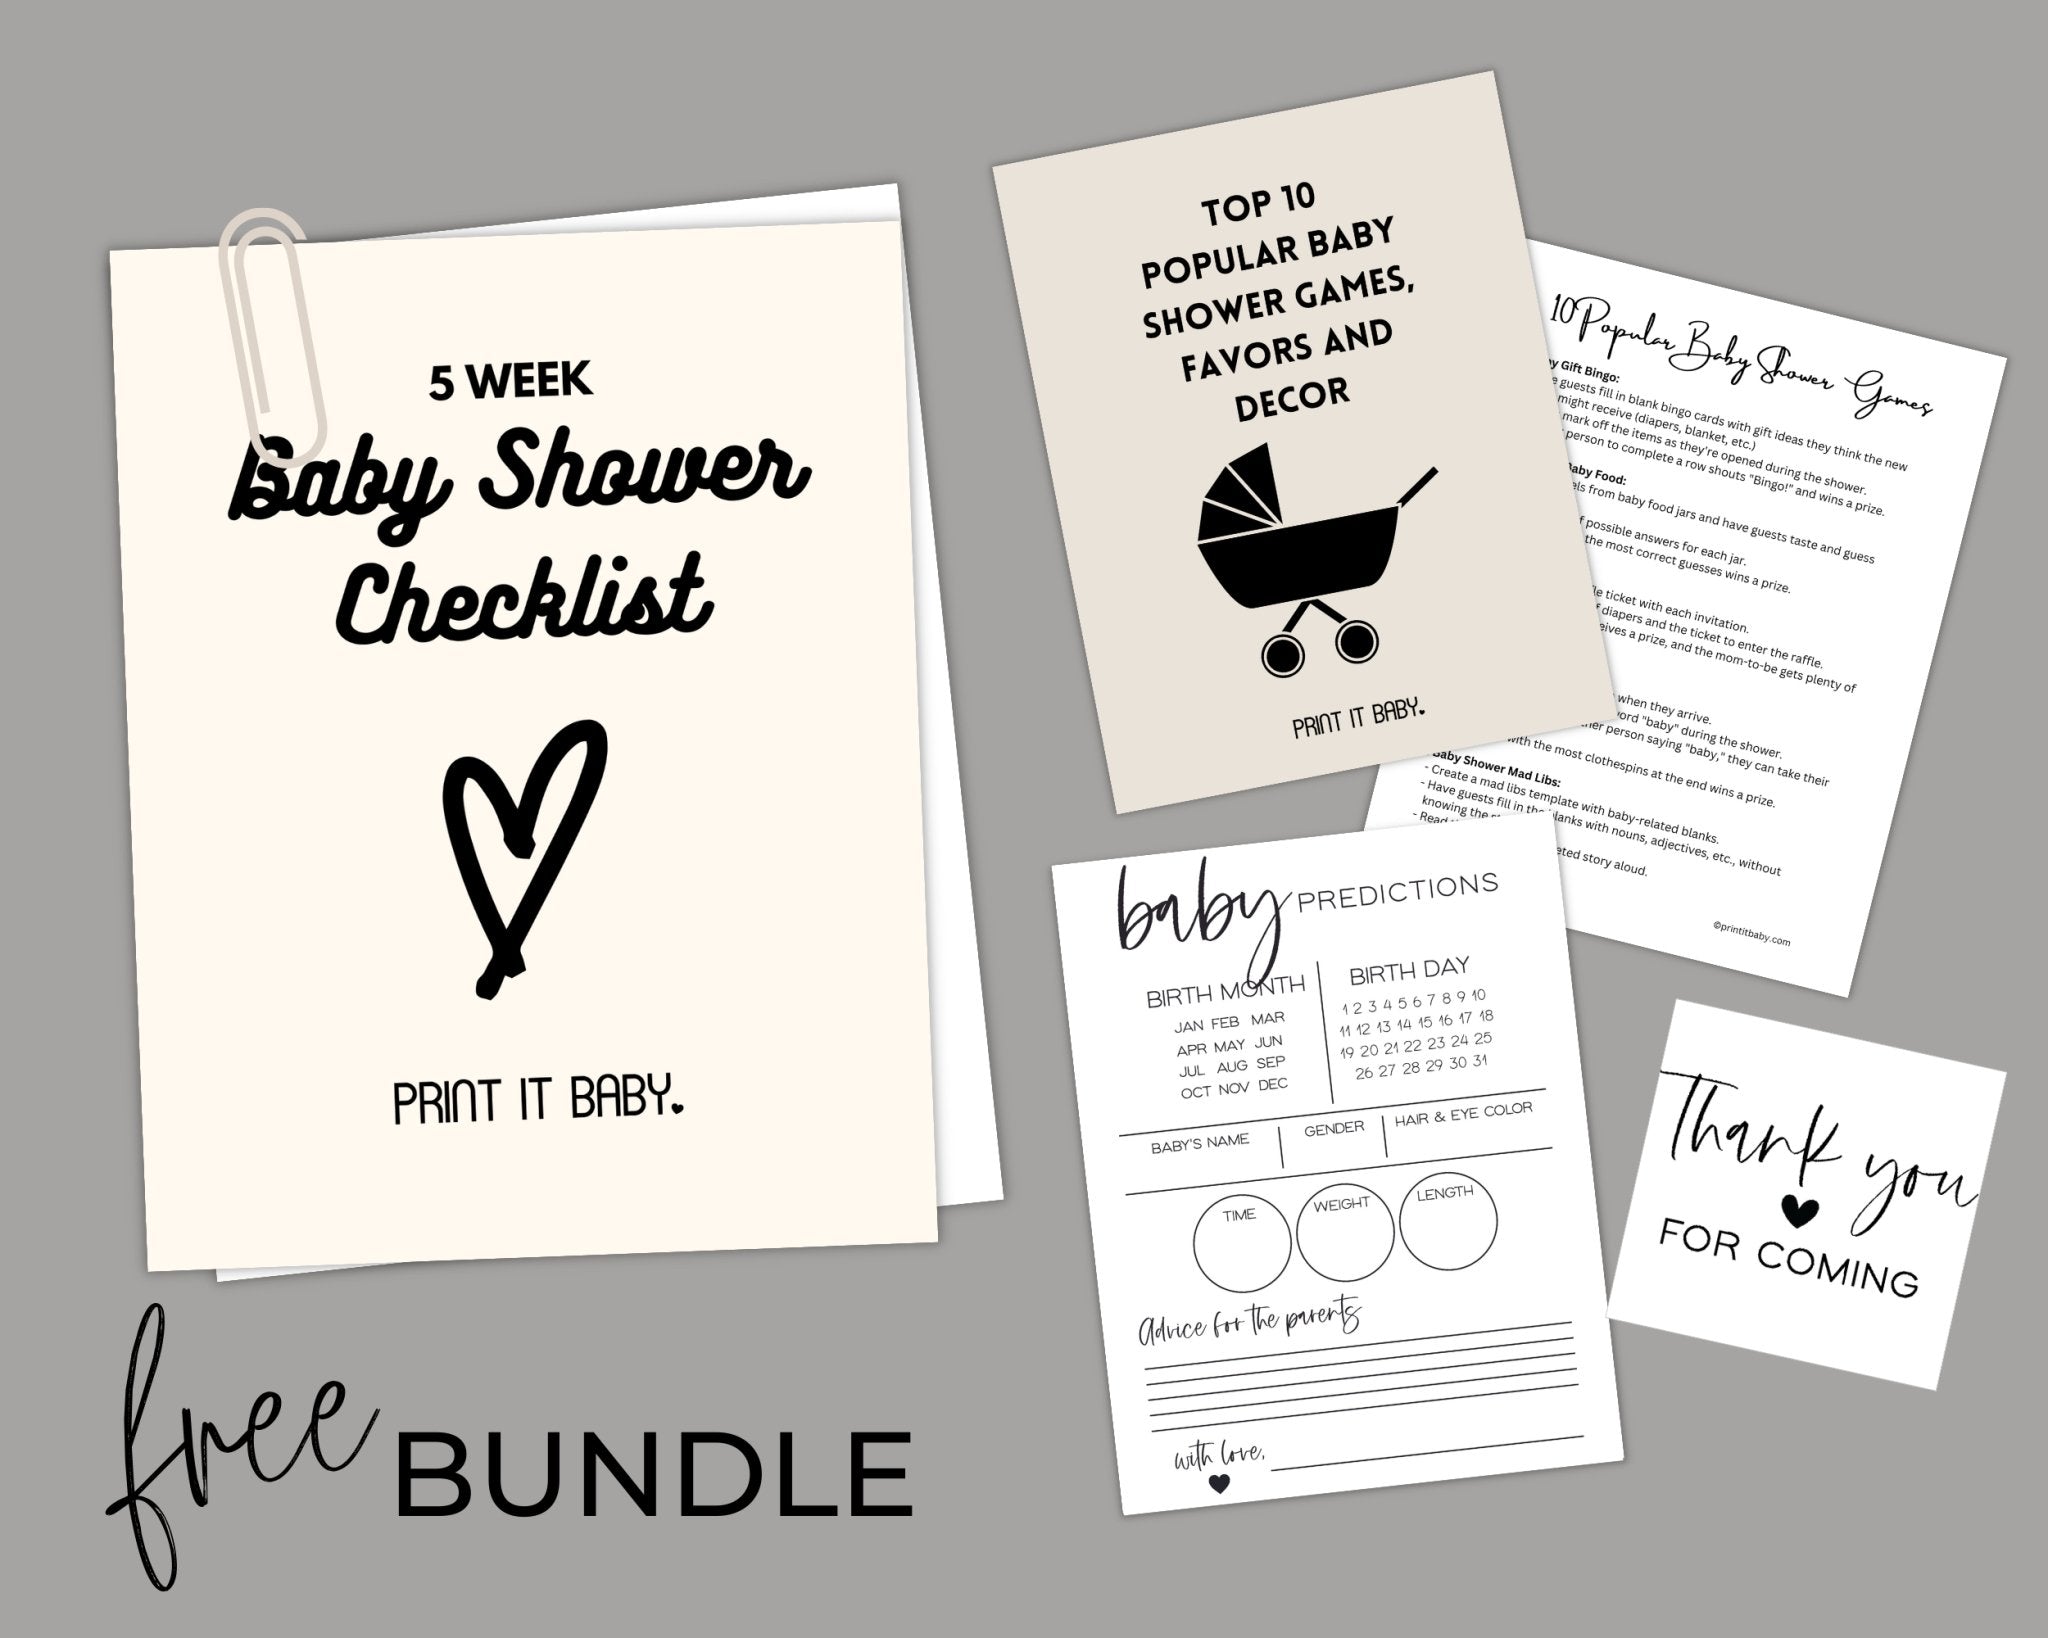 FREE Baby Shower Bundle: Planning That Baby Shower Just Got Easier! - Print It Baby